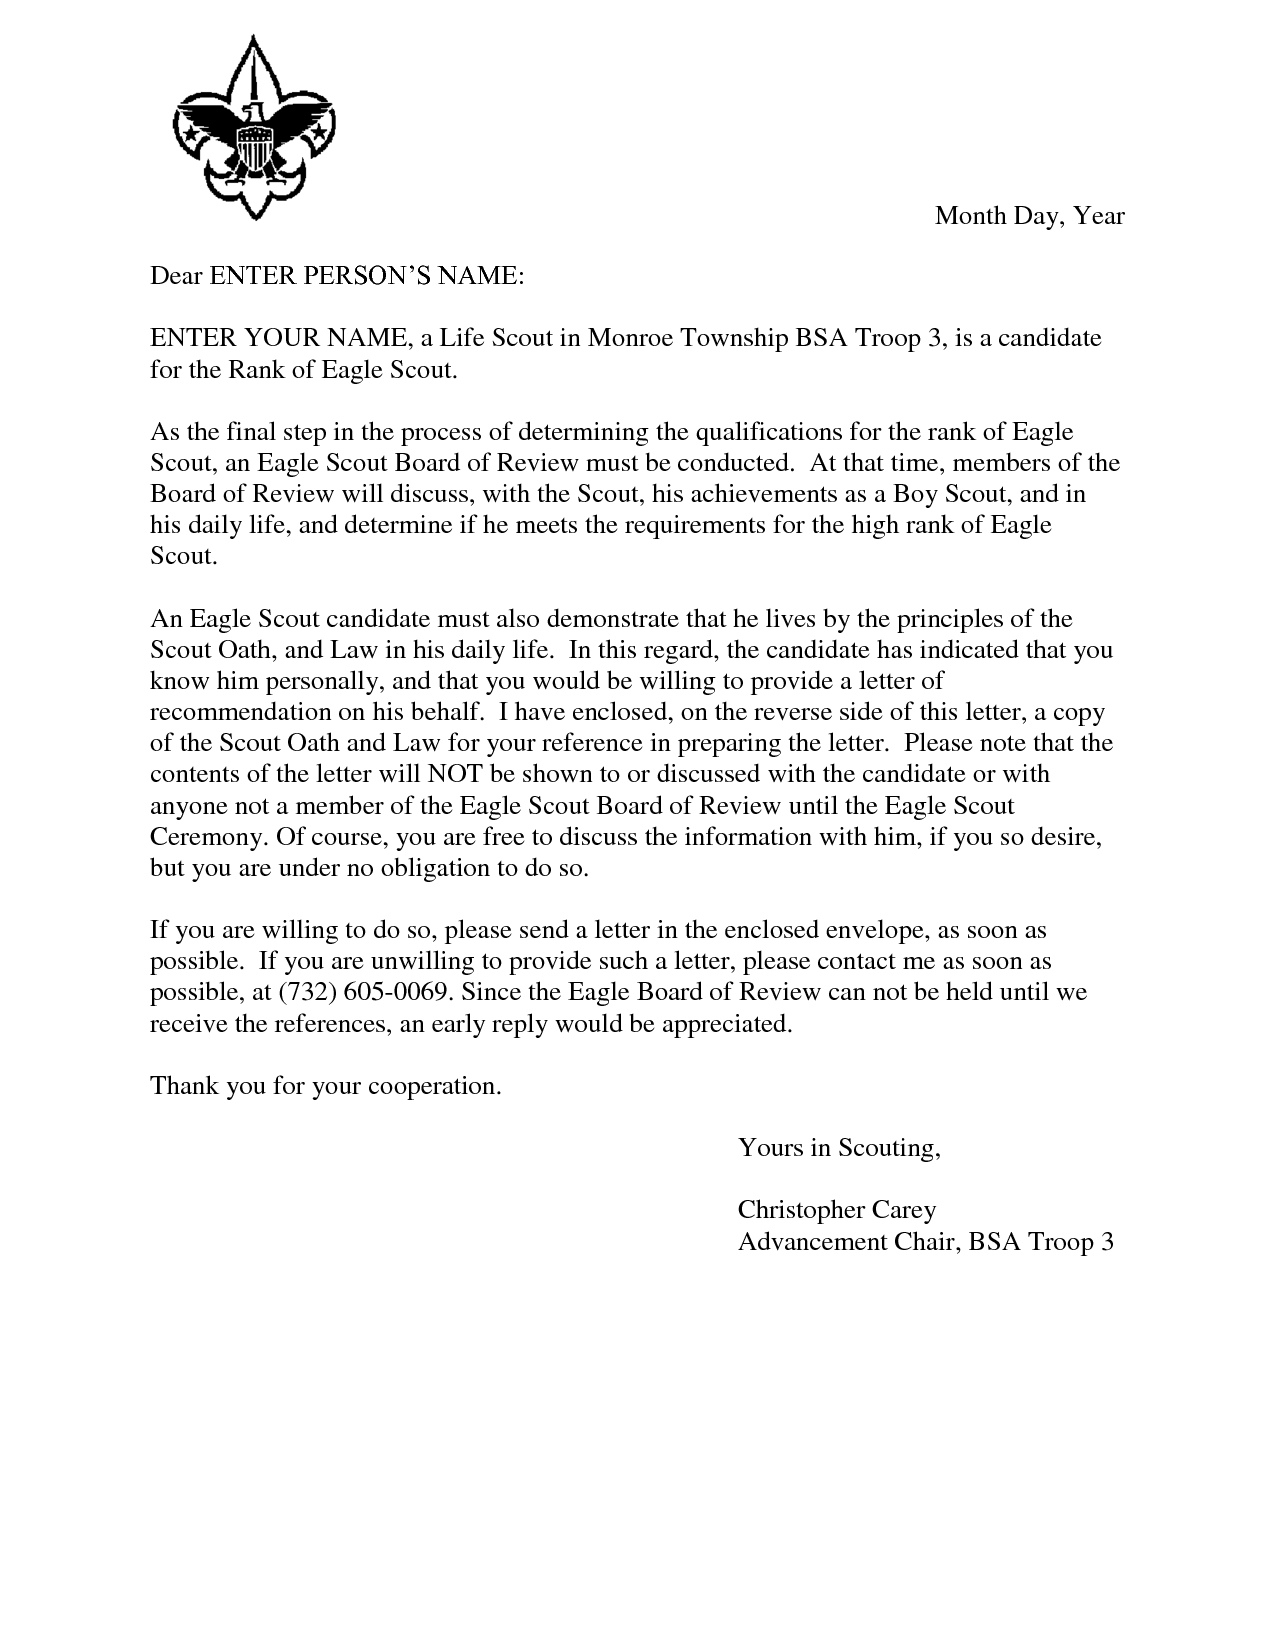 Microsoft Word Letter Of Recommendation Template - Sample Eagle Re Mendation Letter Acurnamedia